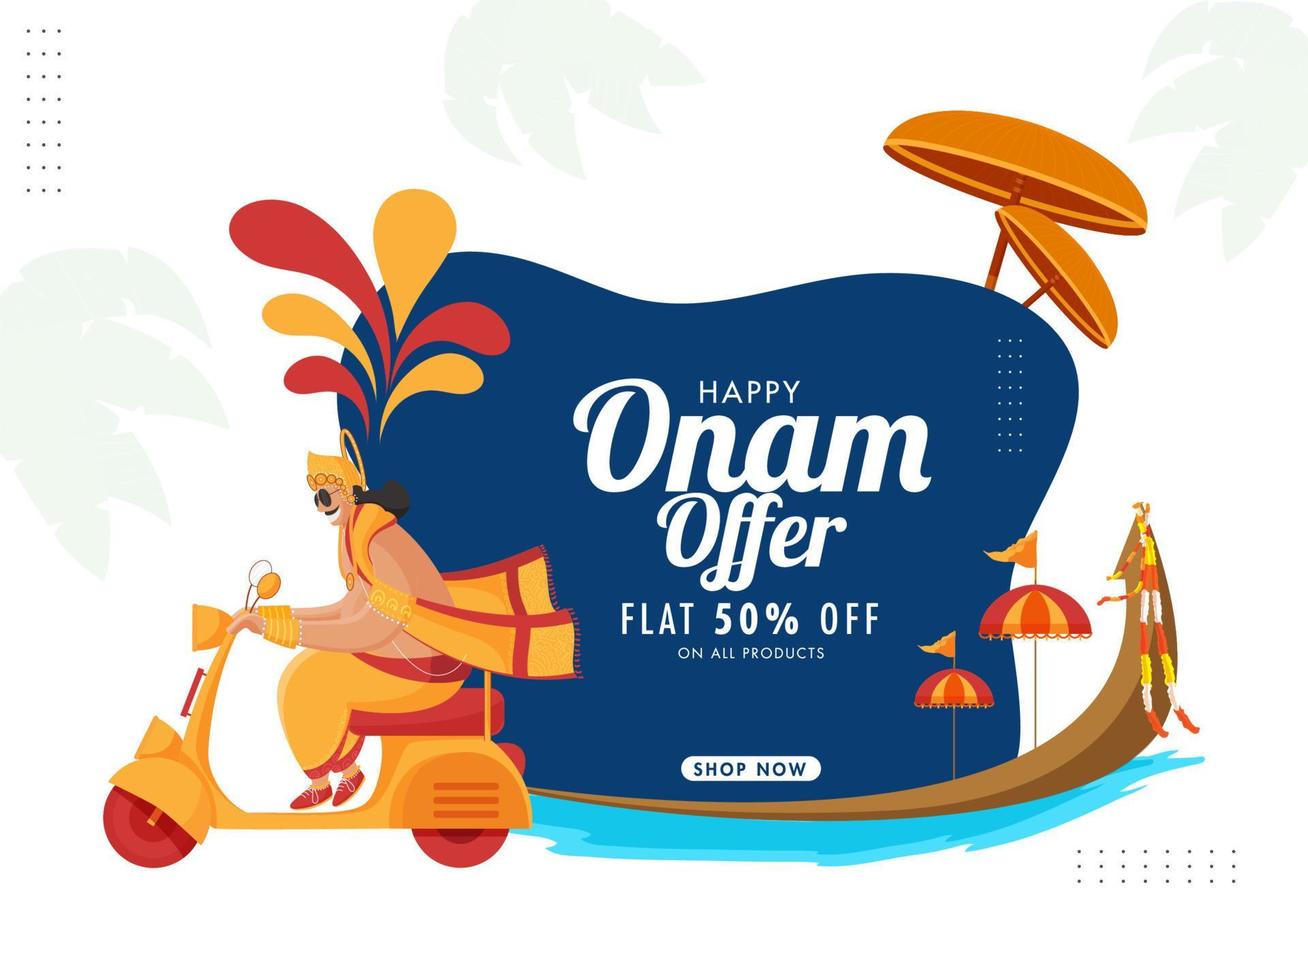 Happy Onam Sale Poster Design with Discount Offer, Aranmula Boat and King Mahabali Driving Scooter on Abstract Background. vector